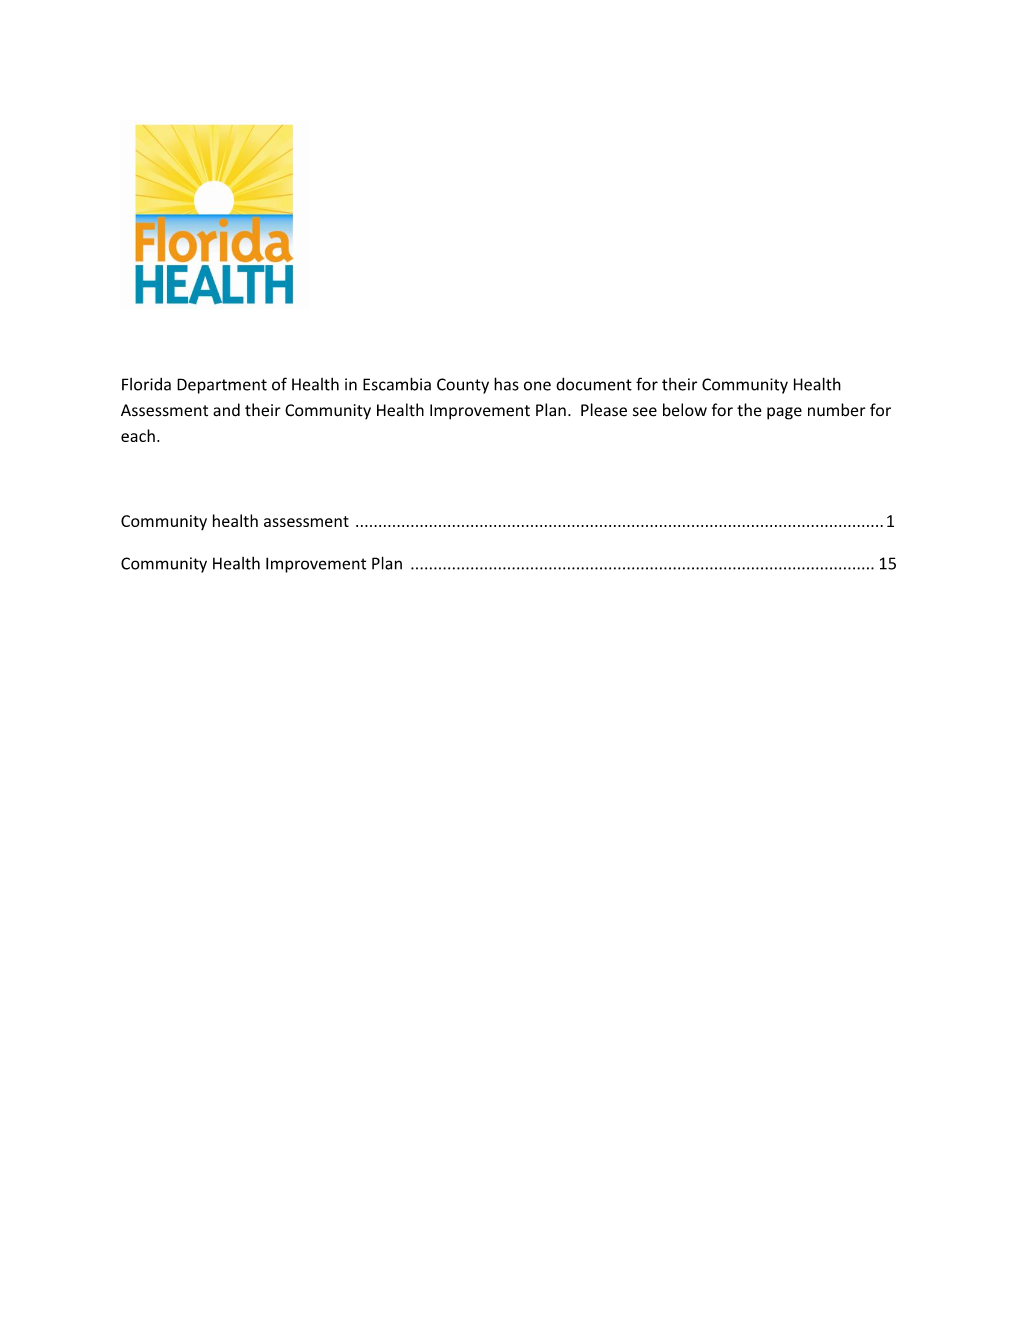 Florida Department of Health in Escambia County Has One Document for Their Community Health Assessment and Their Community Health Improvement Plan